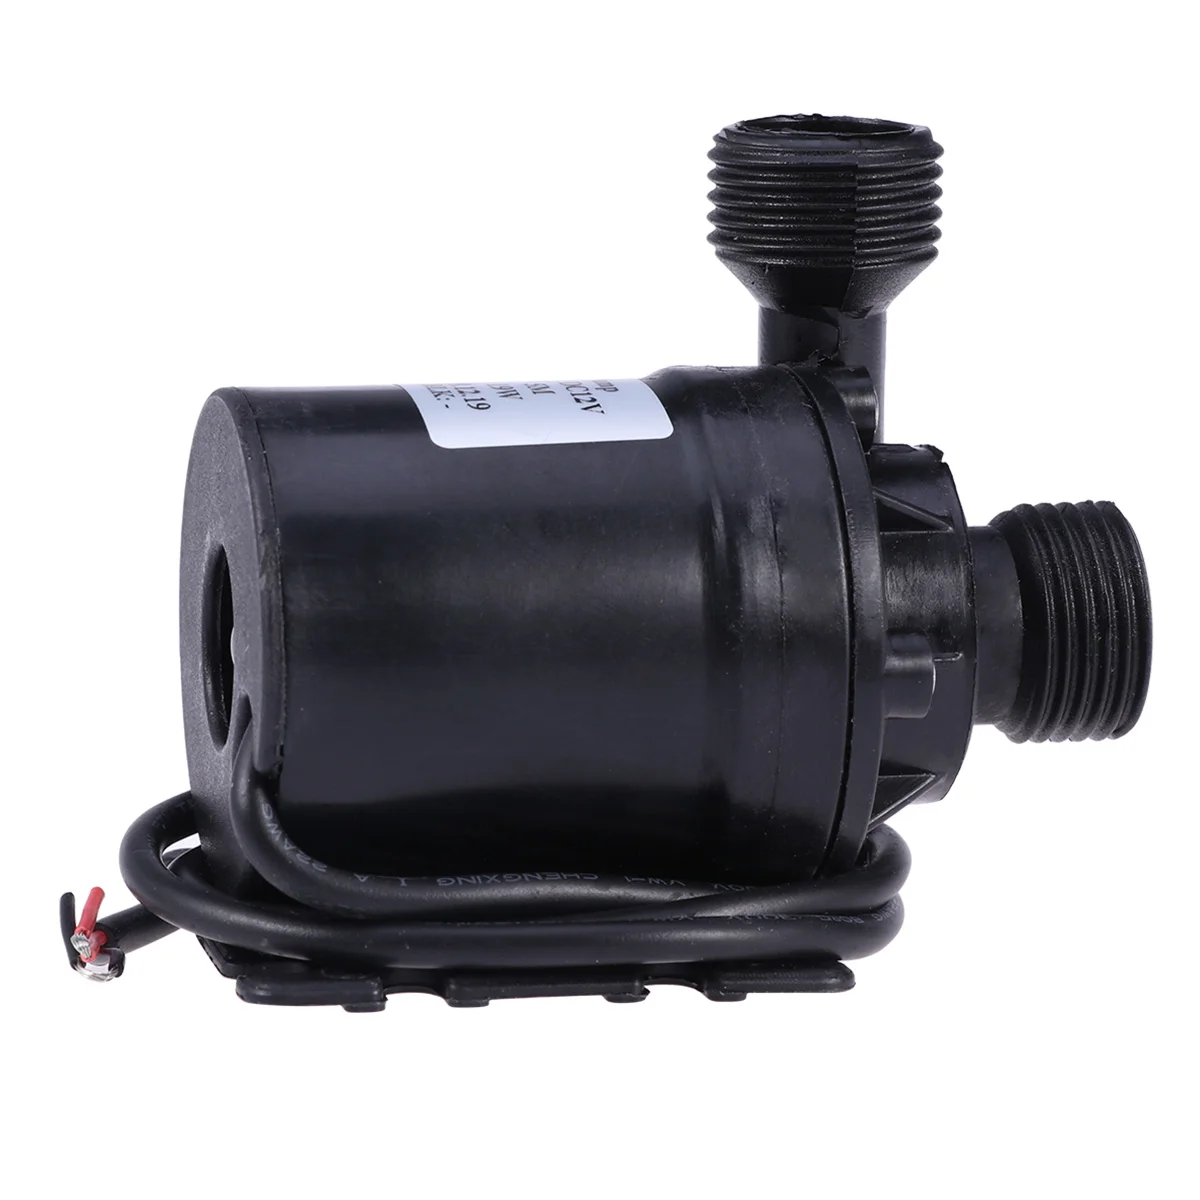 

DC 12V Brushless Submersible Water Pump Water Pump 800L/ 5M for Pond Aquariums Fountains Spouts Circulation System